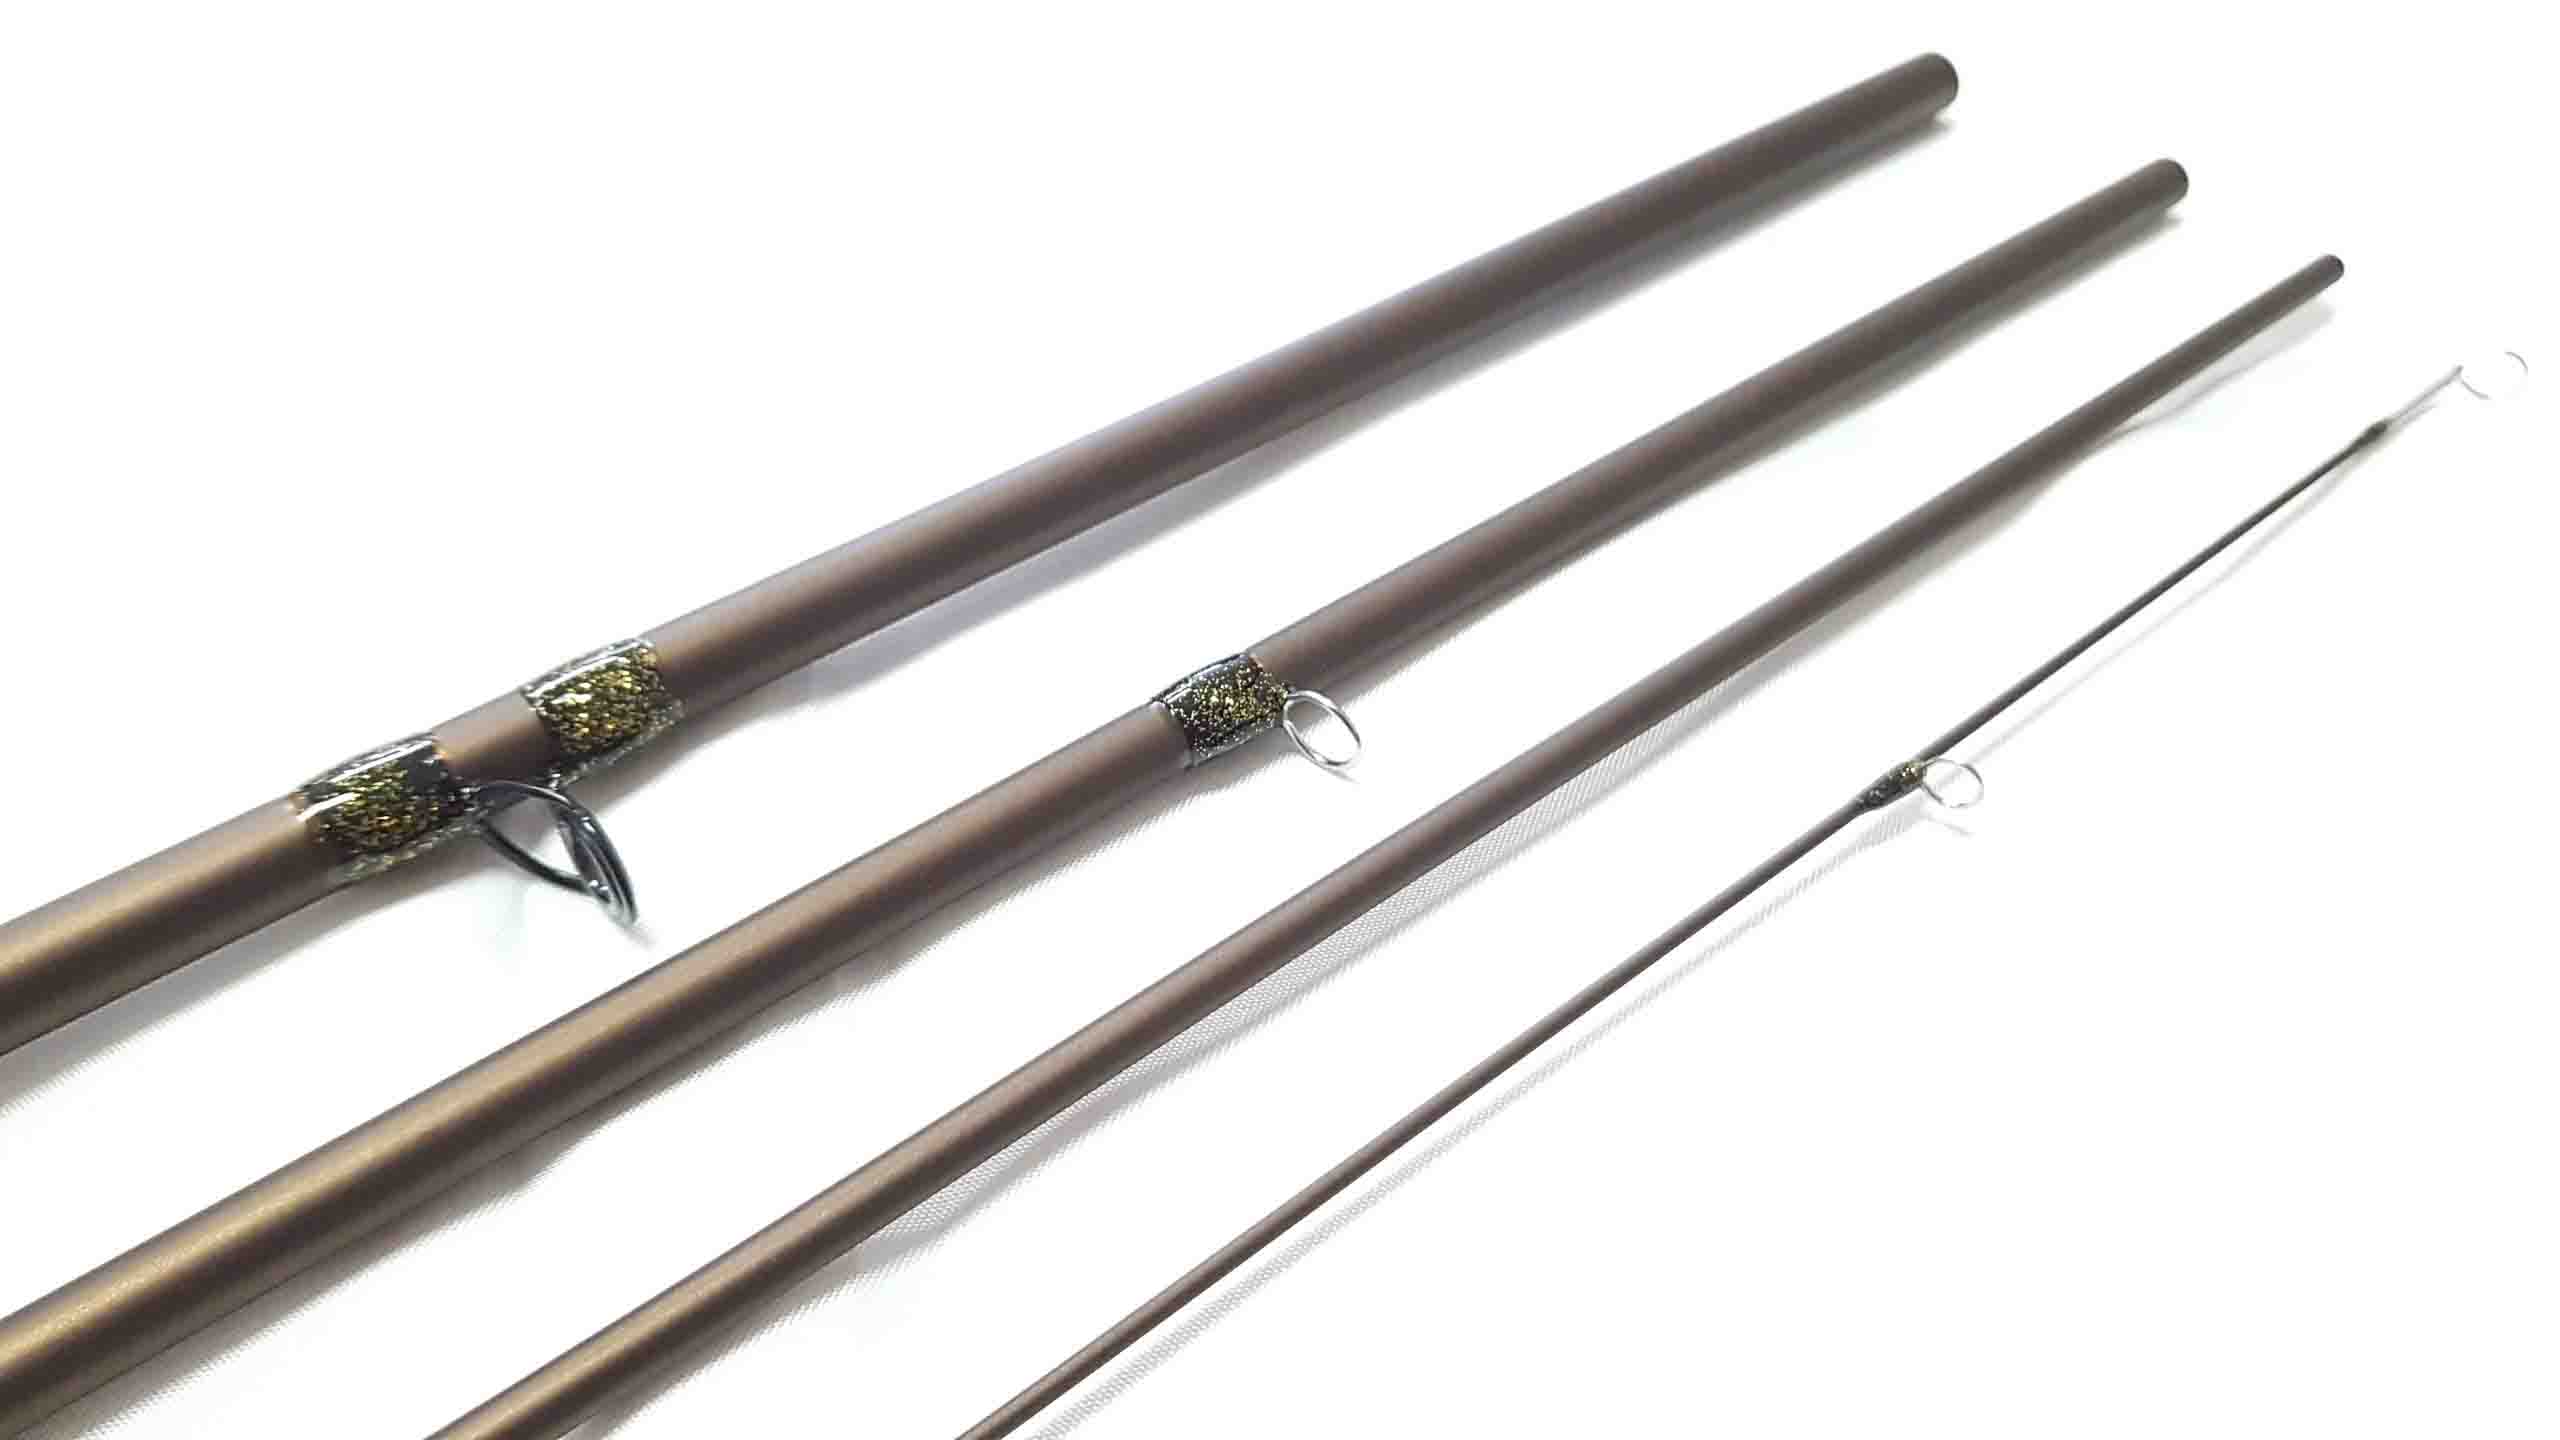 Details 10,6ft #2 nymph fly rod